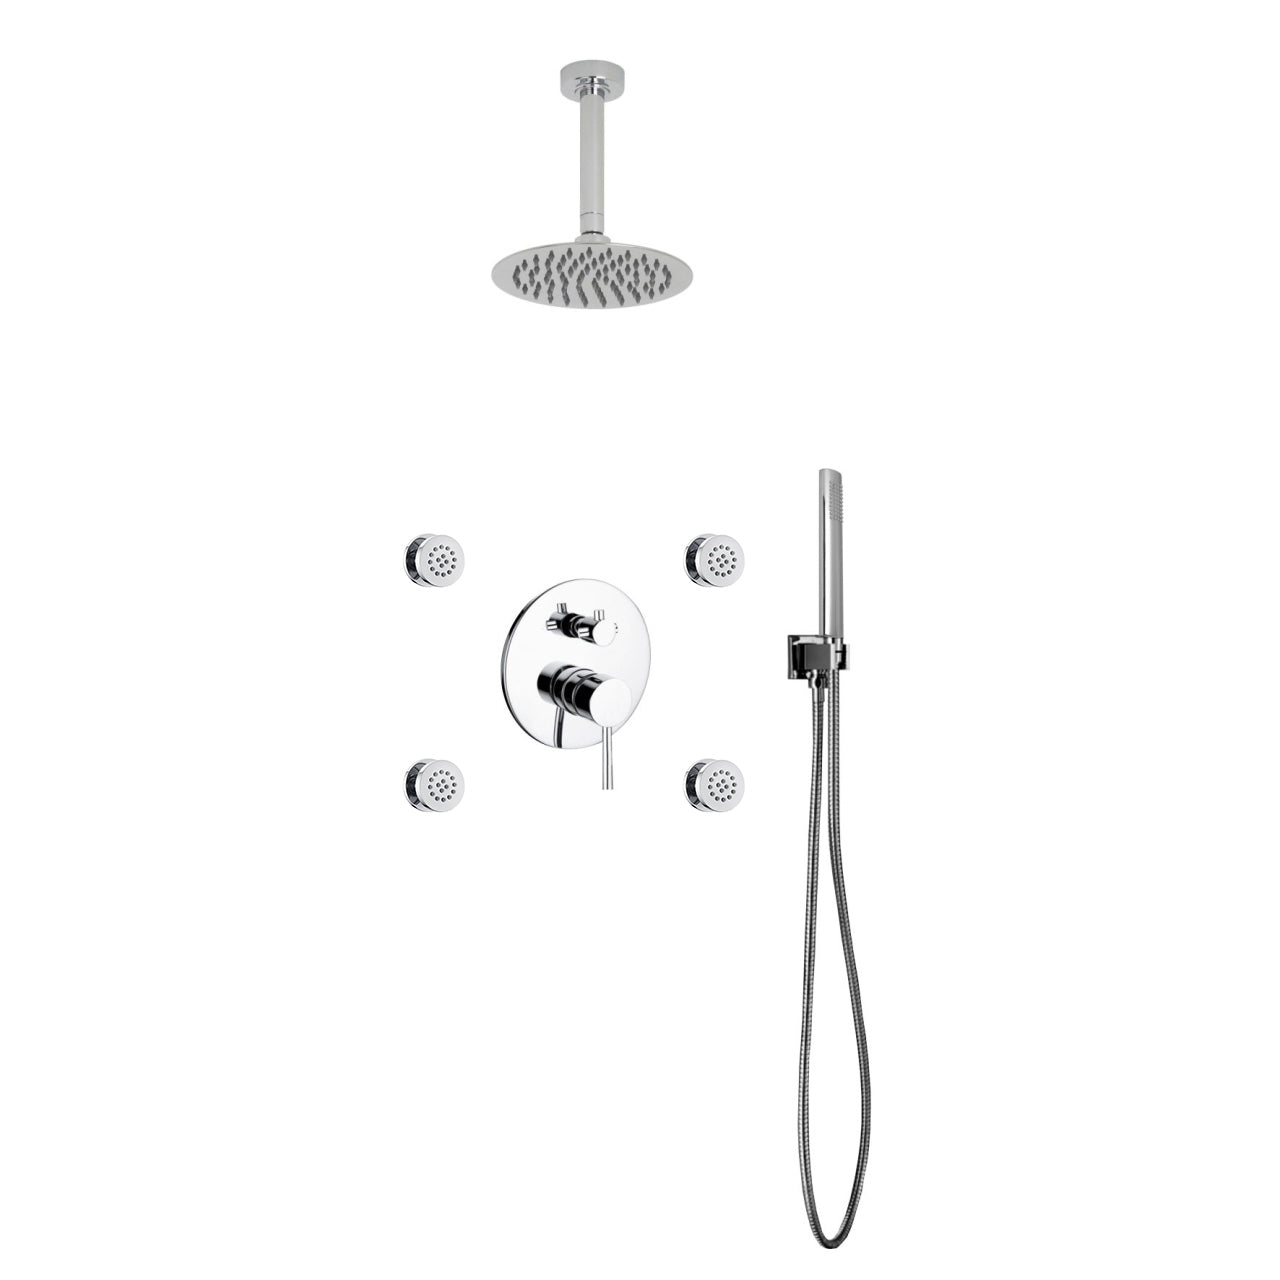 Aqua Rondo Brass Shower Set with Ceiling Mount Square Rain Shower, 4 Body Jets and Handheld - Home and Bath Depot